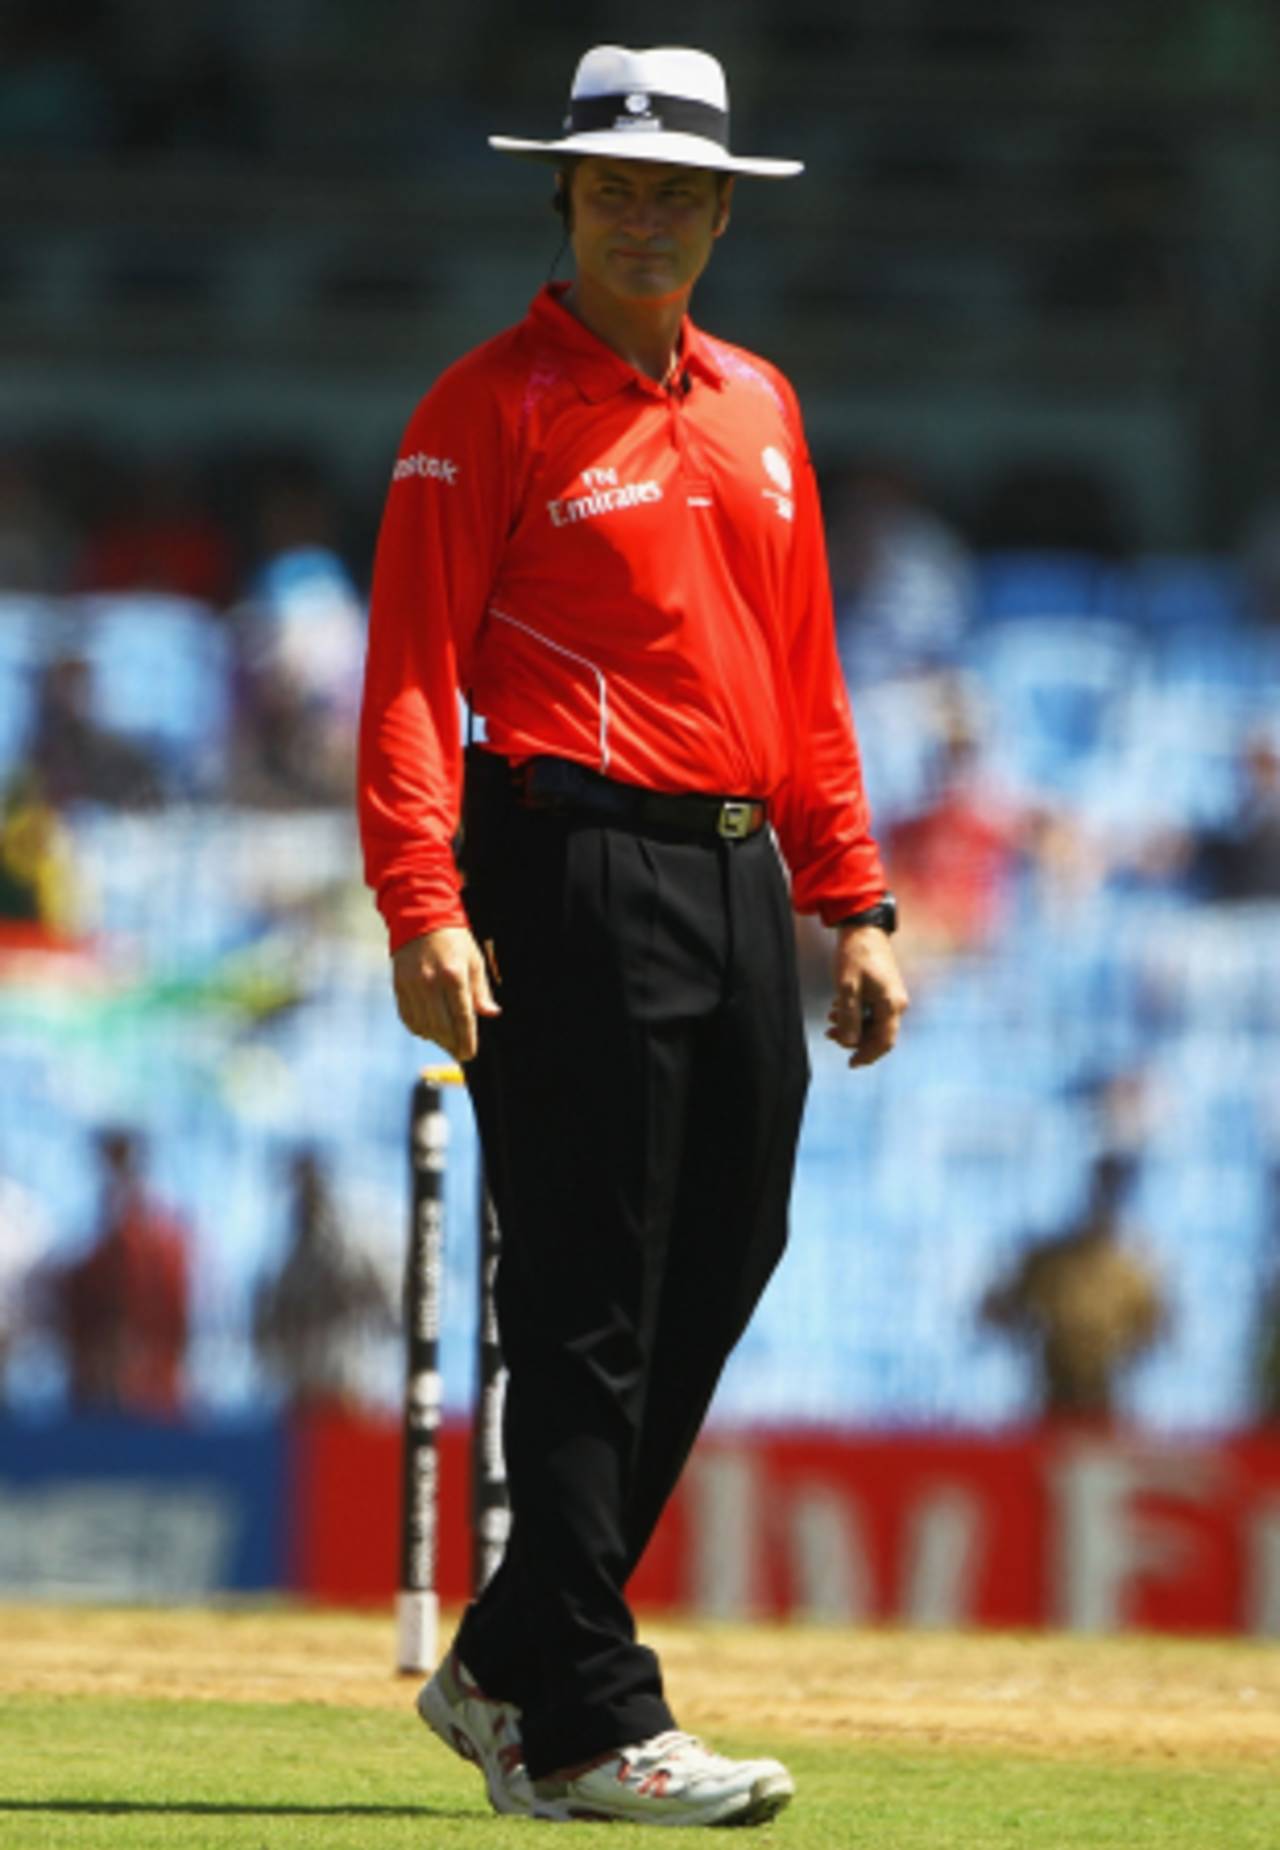 Simon Taufel has been one of the most respected umpires on the ICC's elite panel for nearly a decade&nbsp;&nbsp;&bull;&nbsp;&nbsp;Getty Images